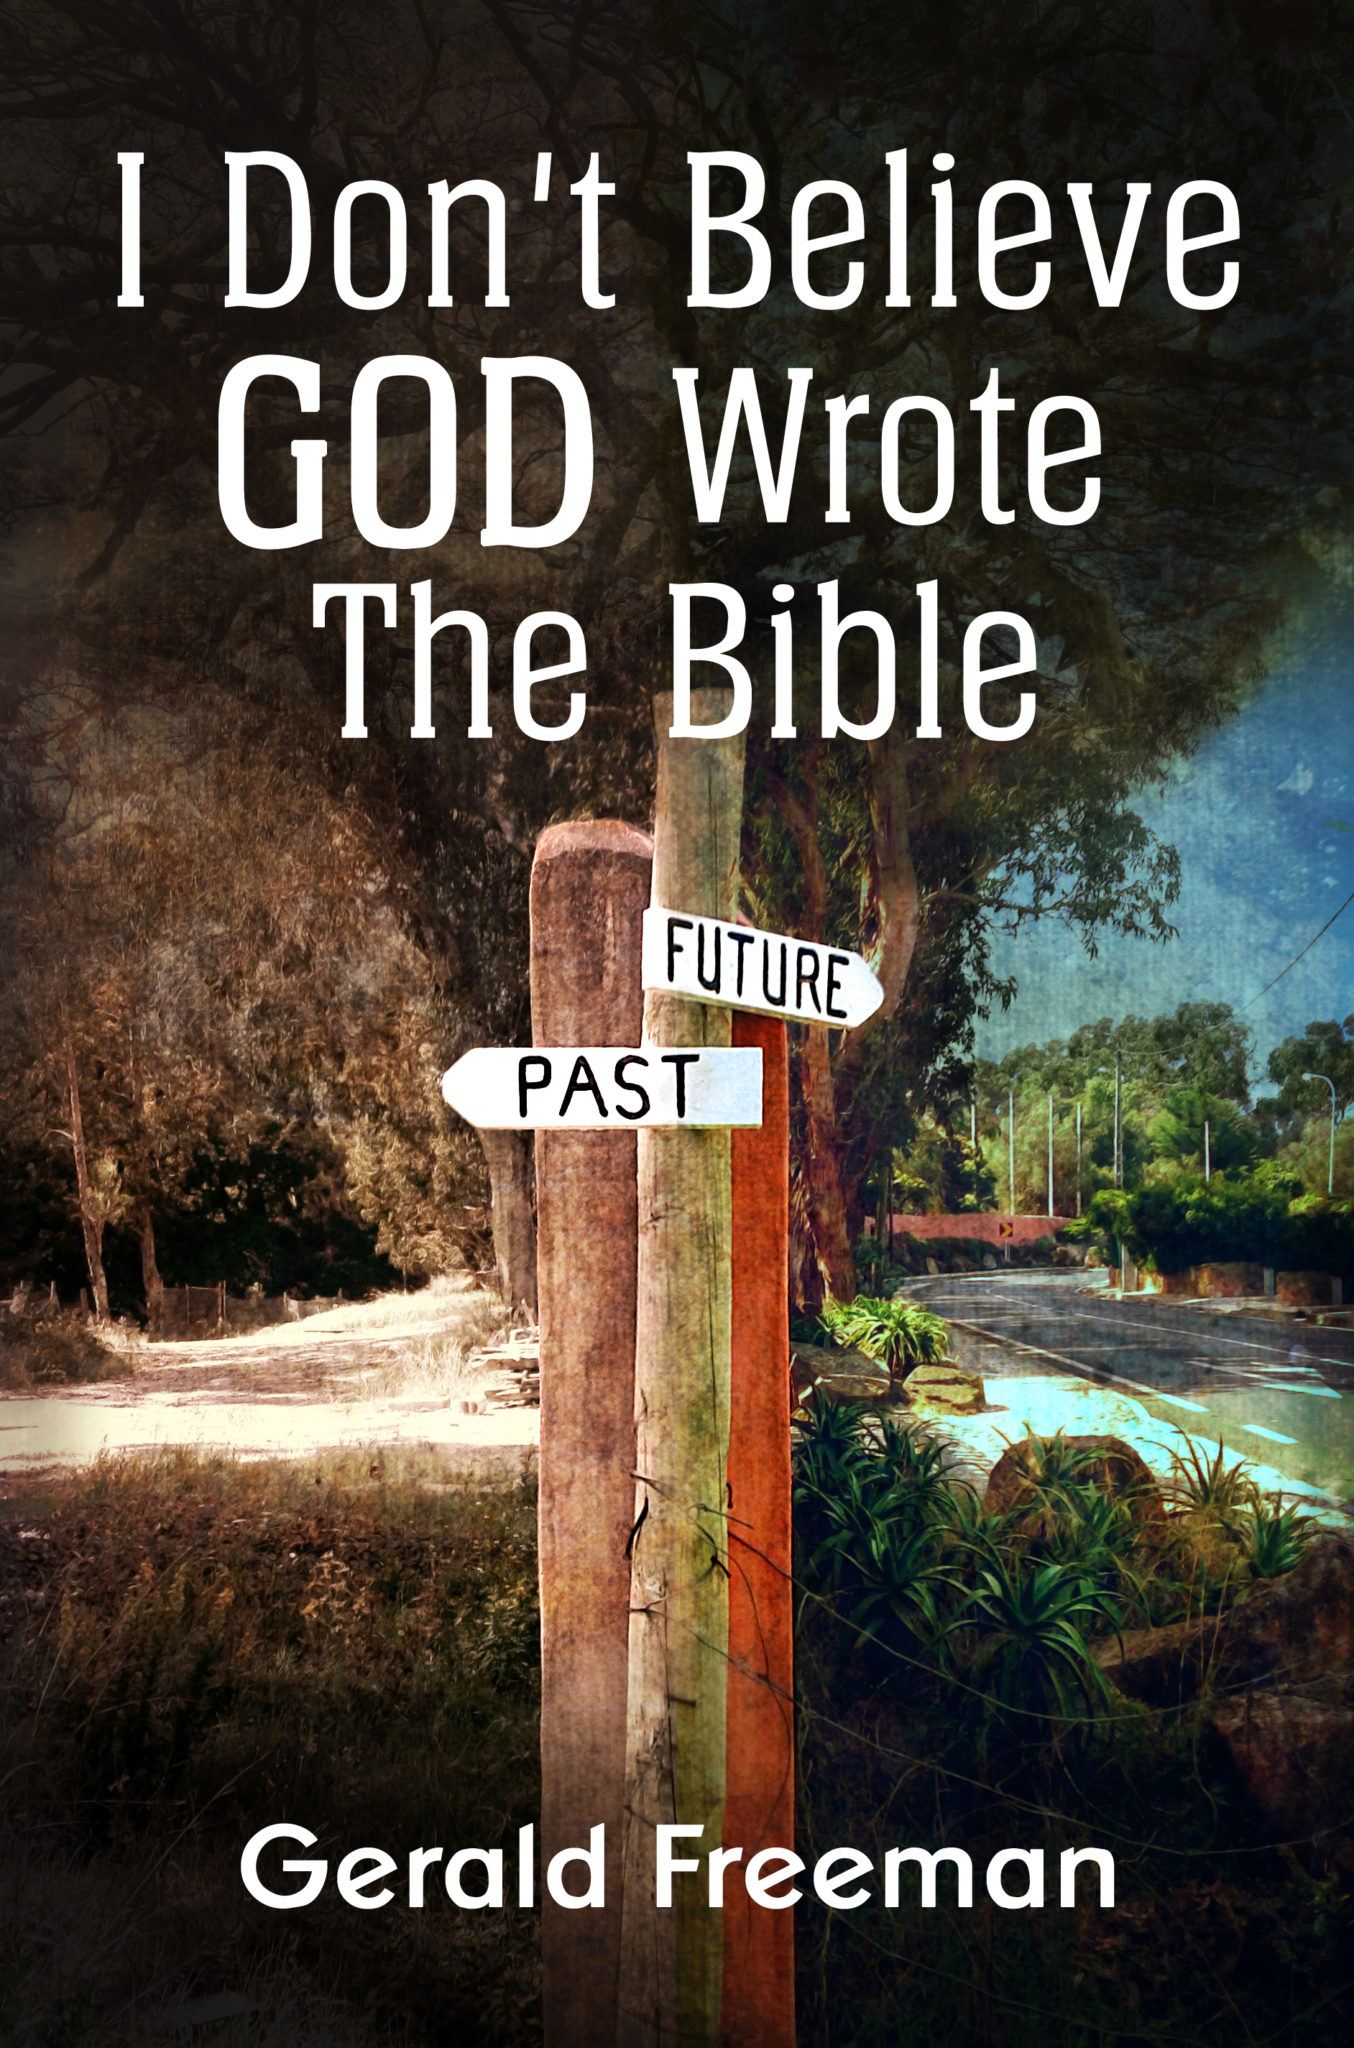 FREE: I Don’t Believe God Wrote The Bible by Gerald Freeman